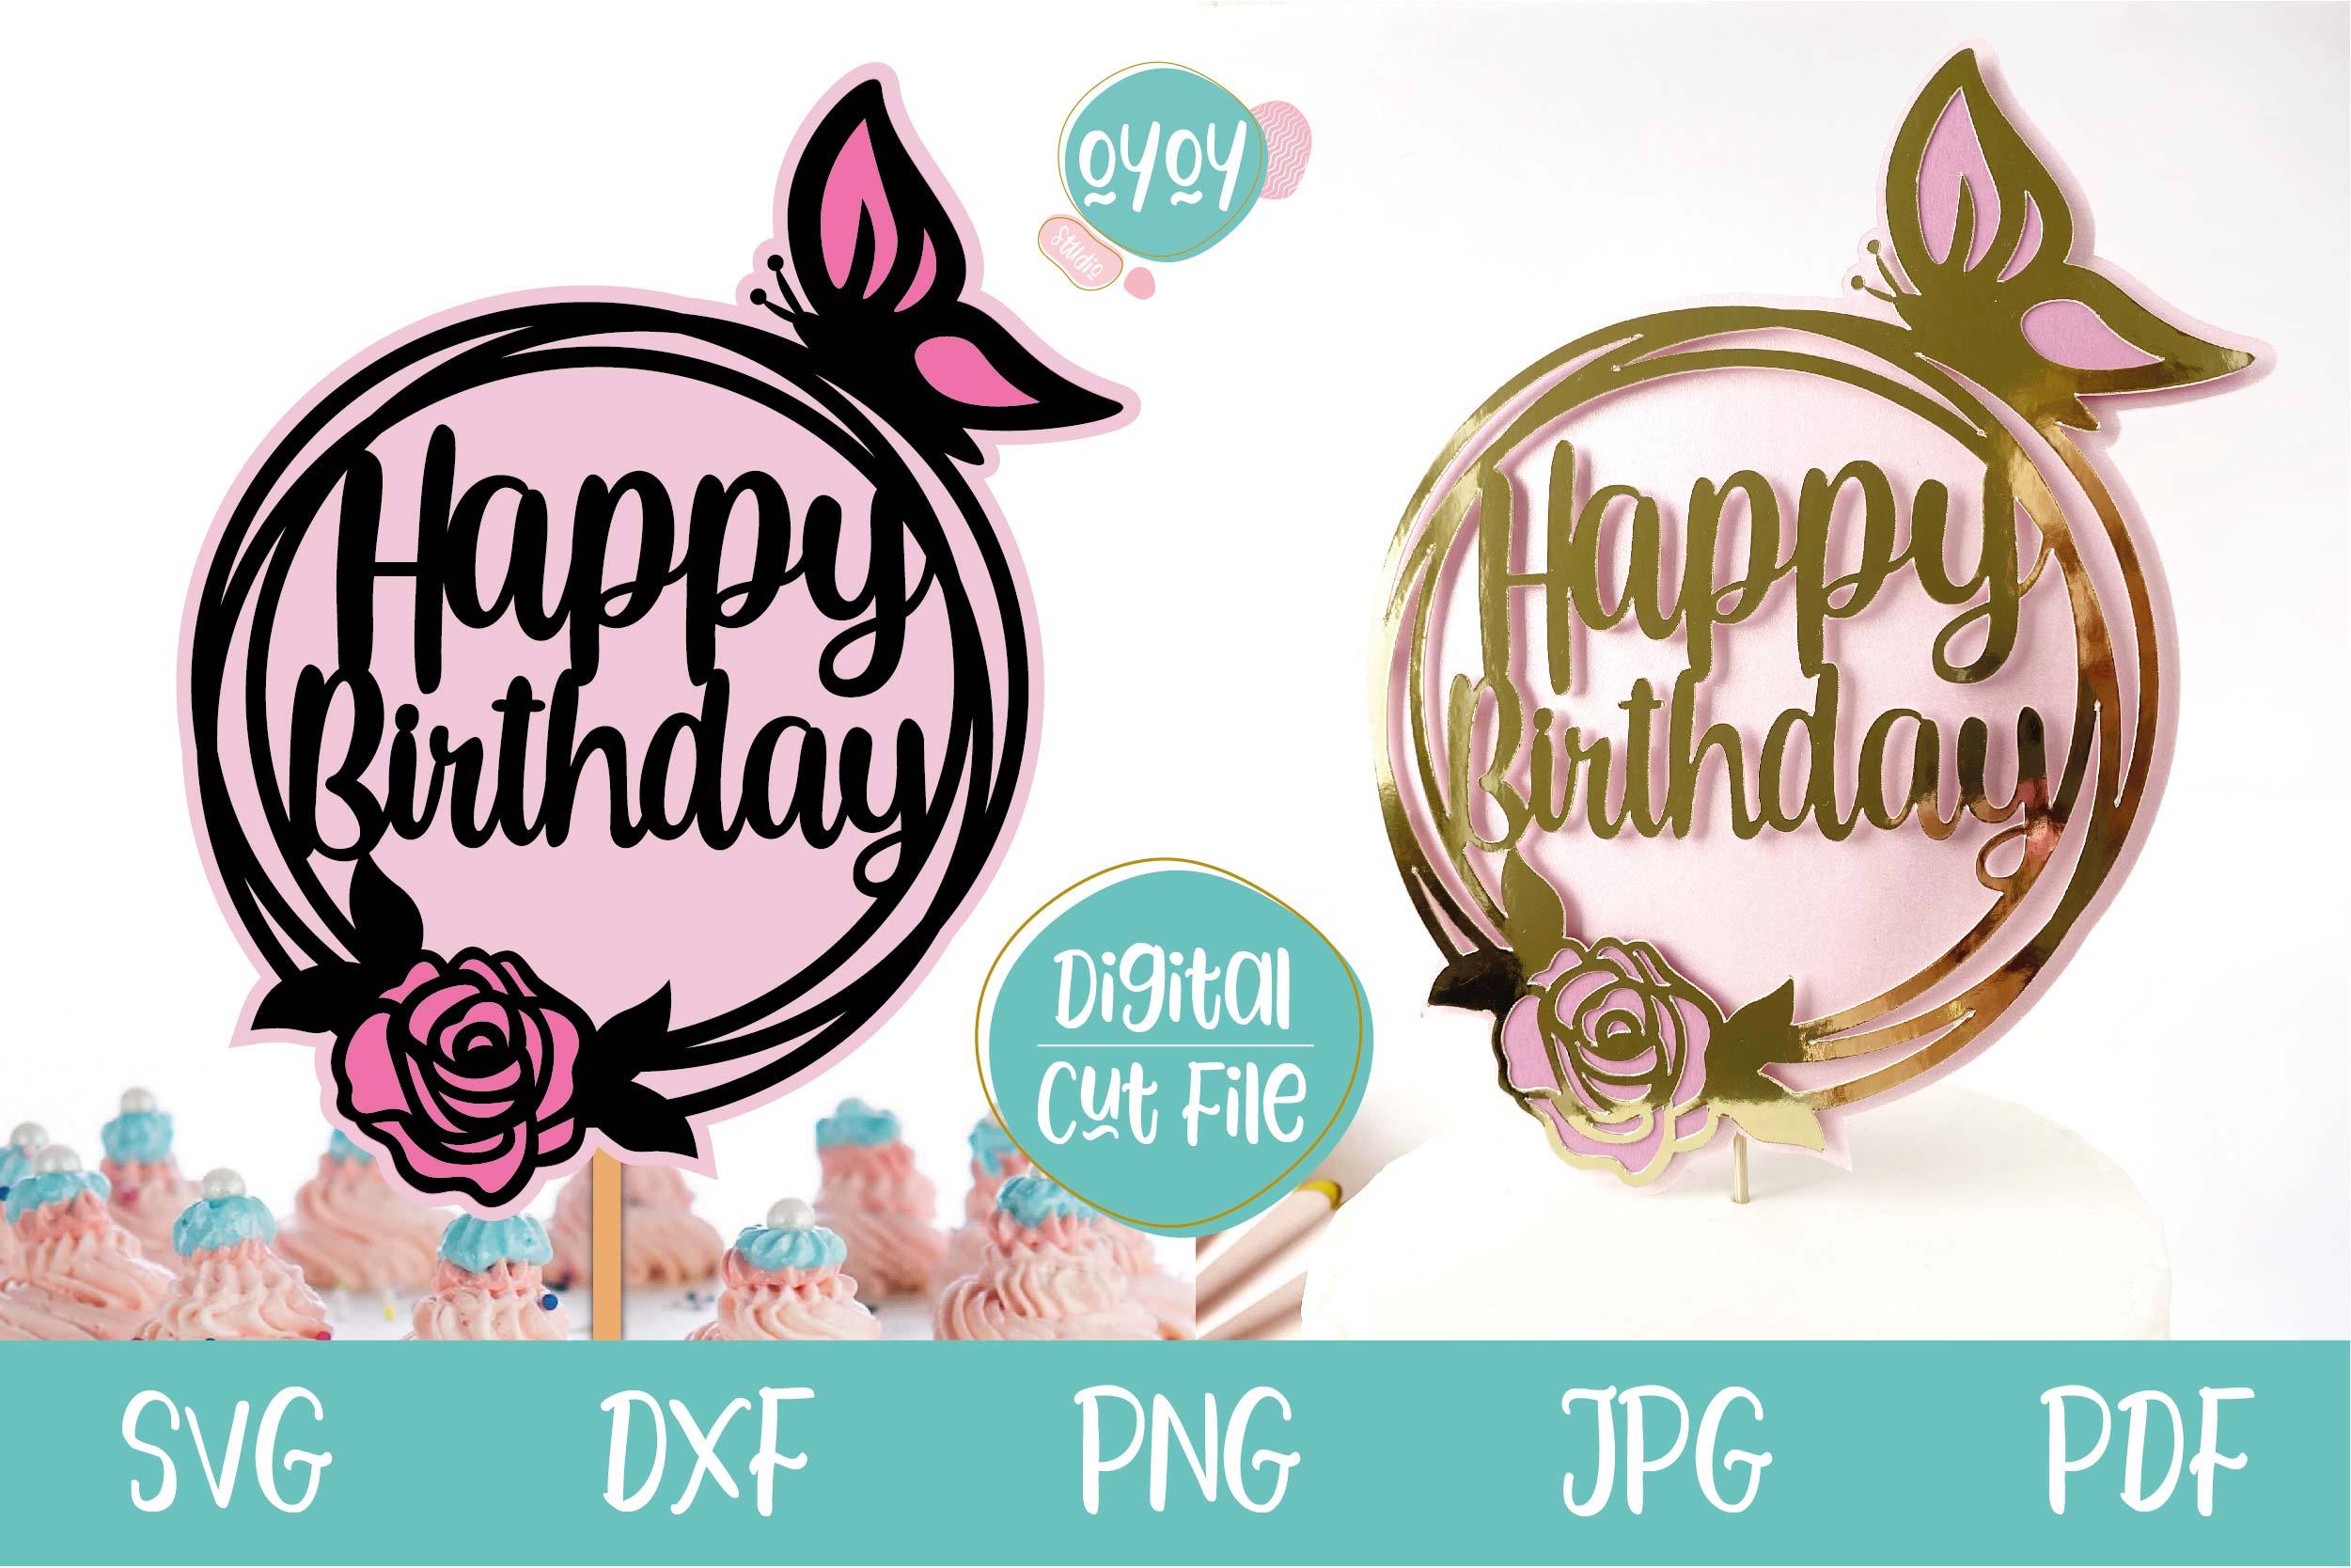 Happy Birthday Cake Topper SVG Cut file by Creative Fabrica Crafts